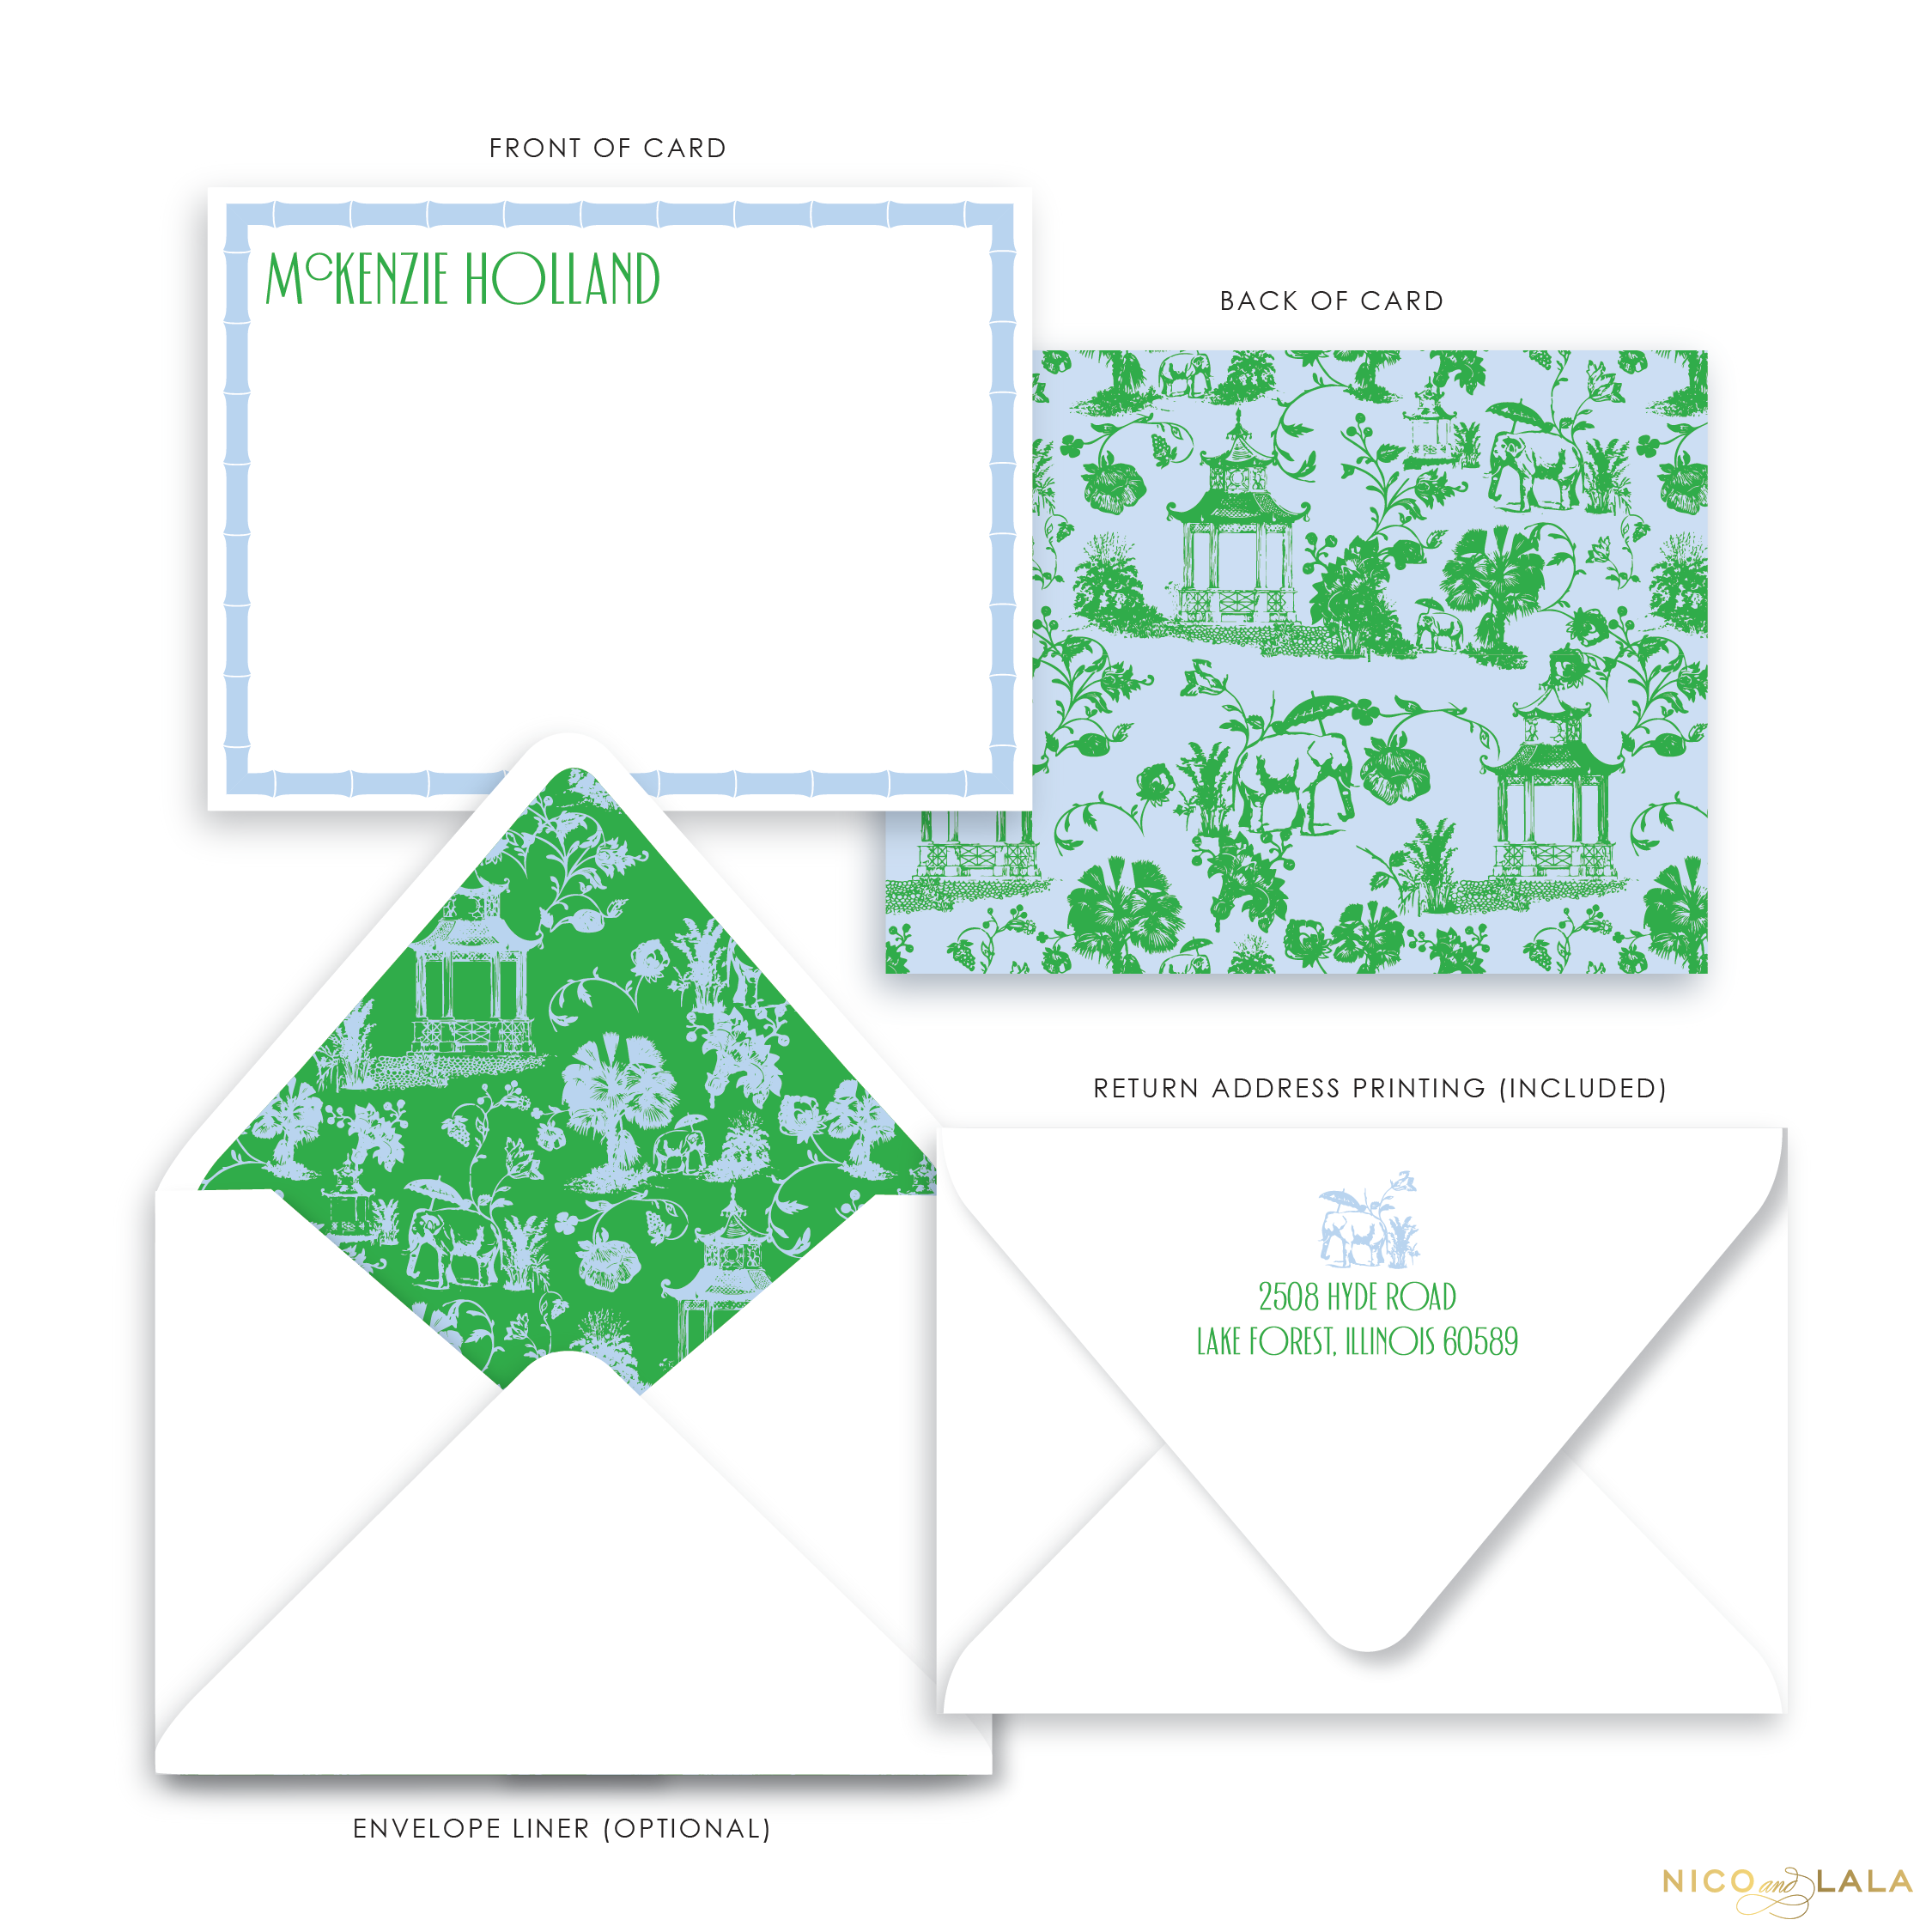 Chinoiserie Stationery